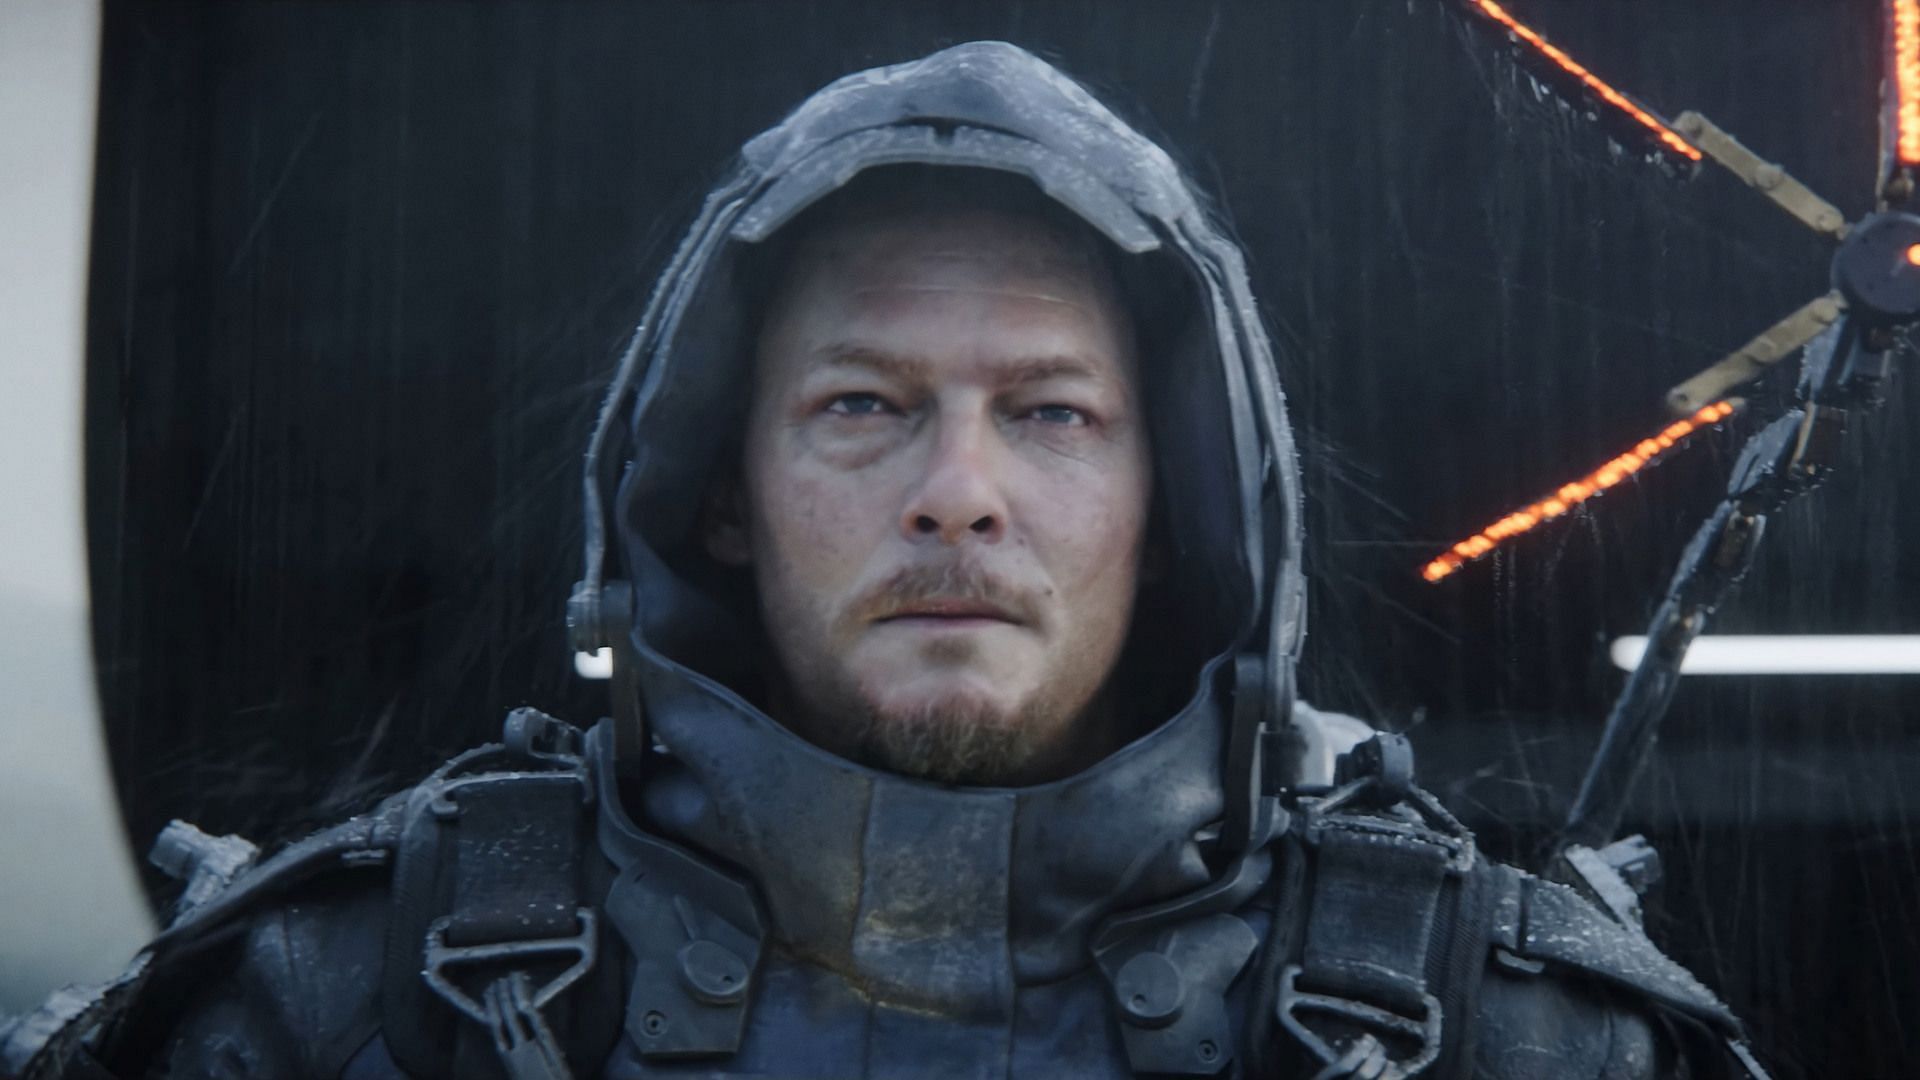 Norman Reedus plays the main character Sam in Death Stranding (Image via Kojima Productions)